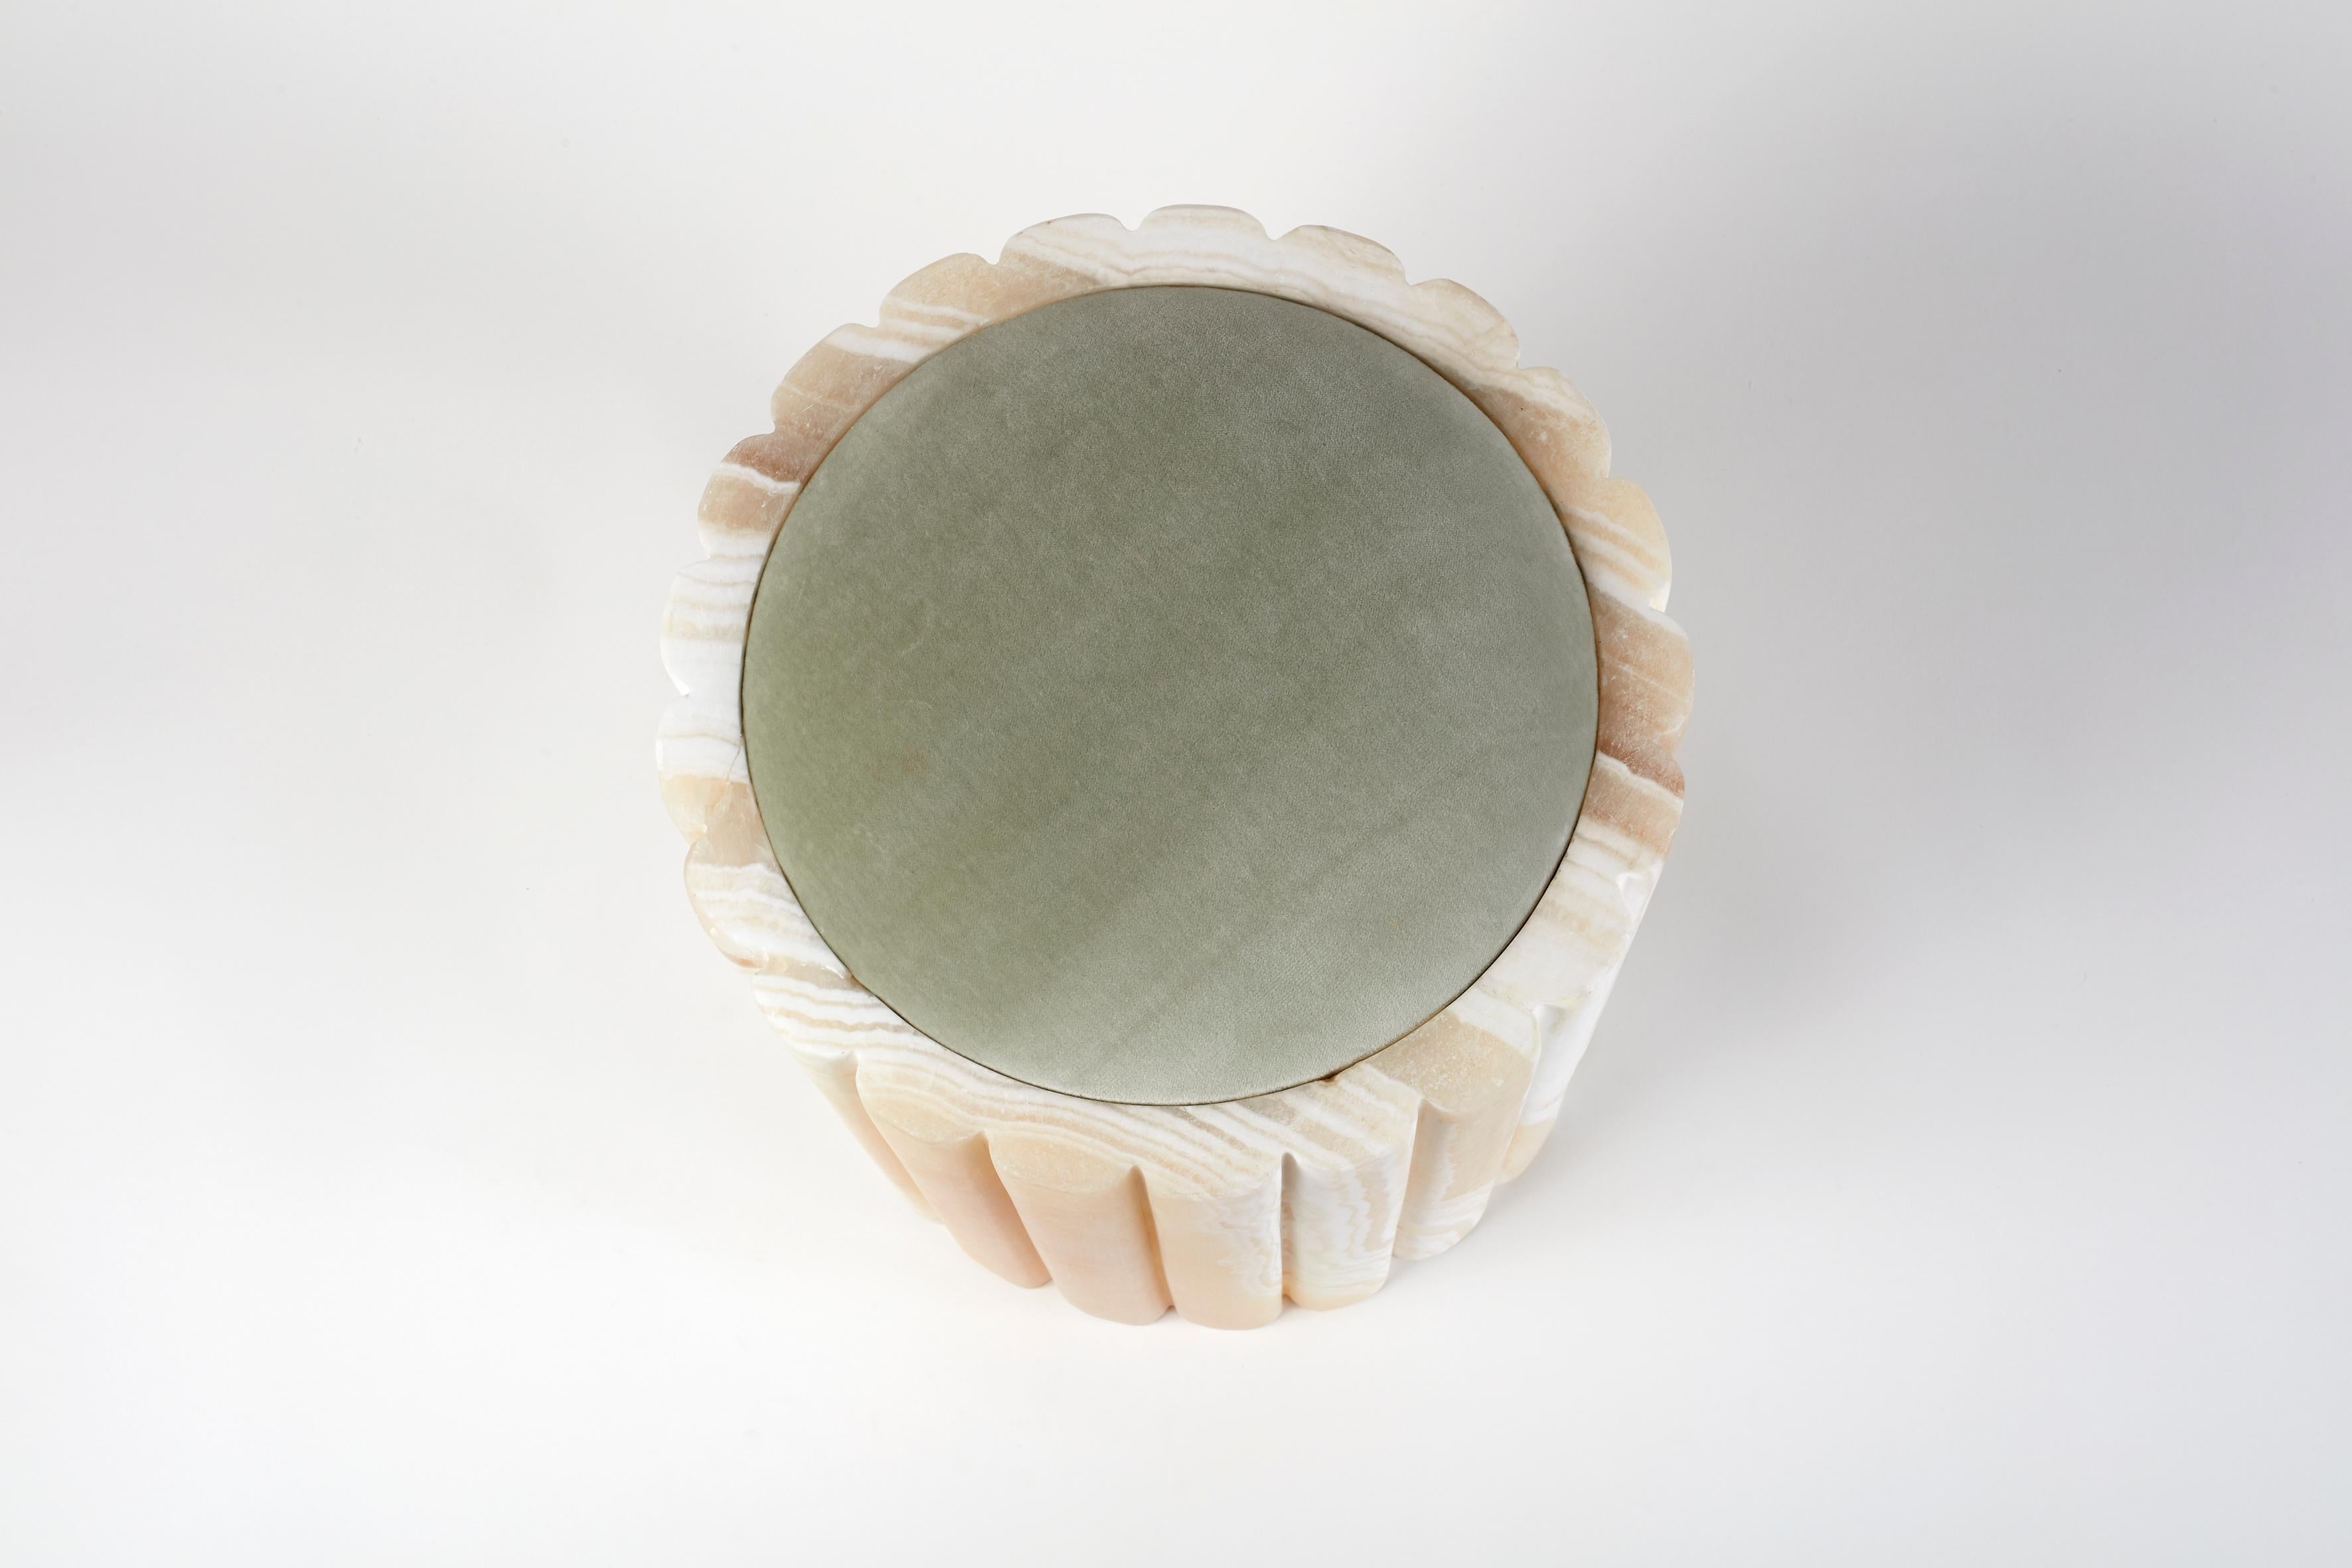 Egyptian Marguerite Alabaster Stool Sculpted by Omar Chakil